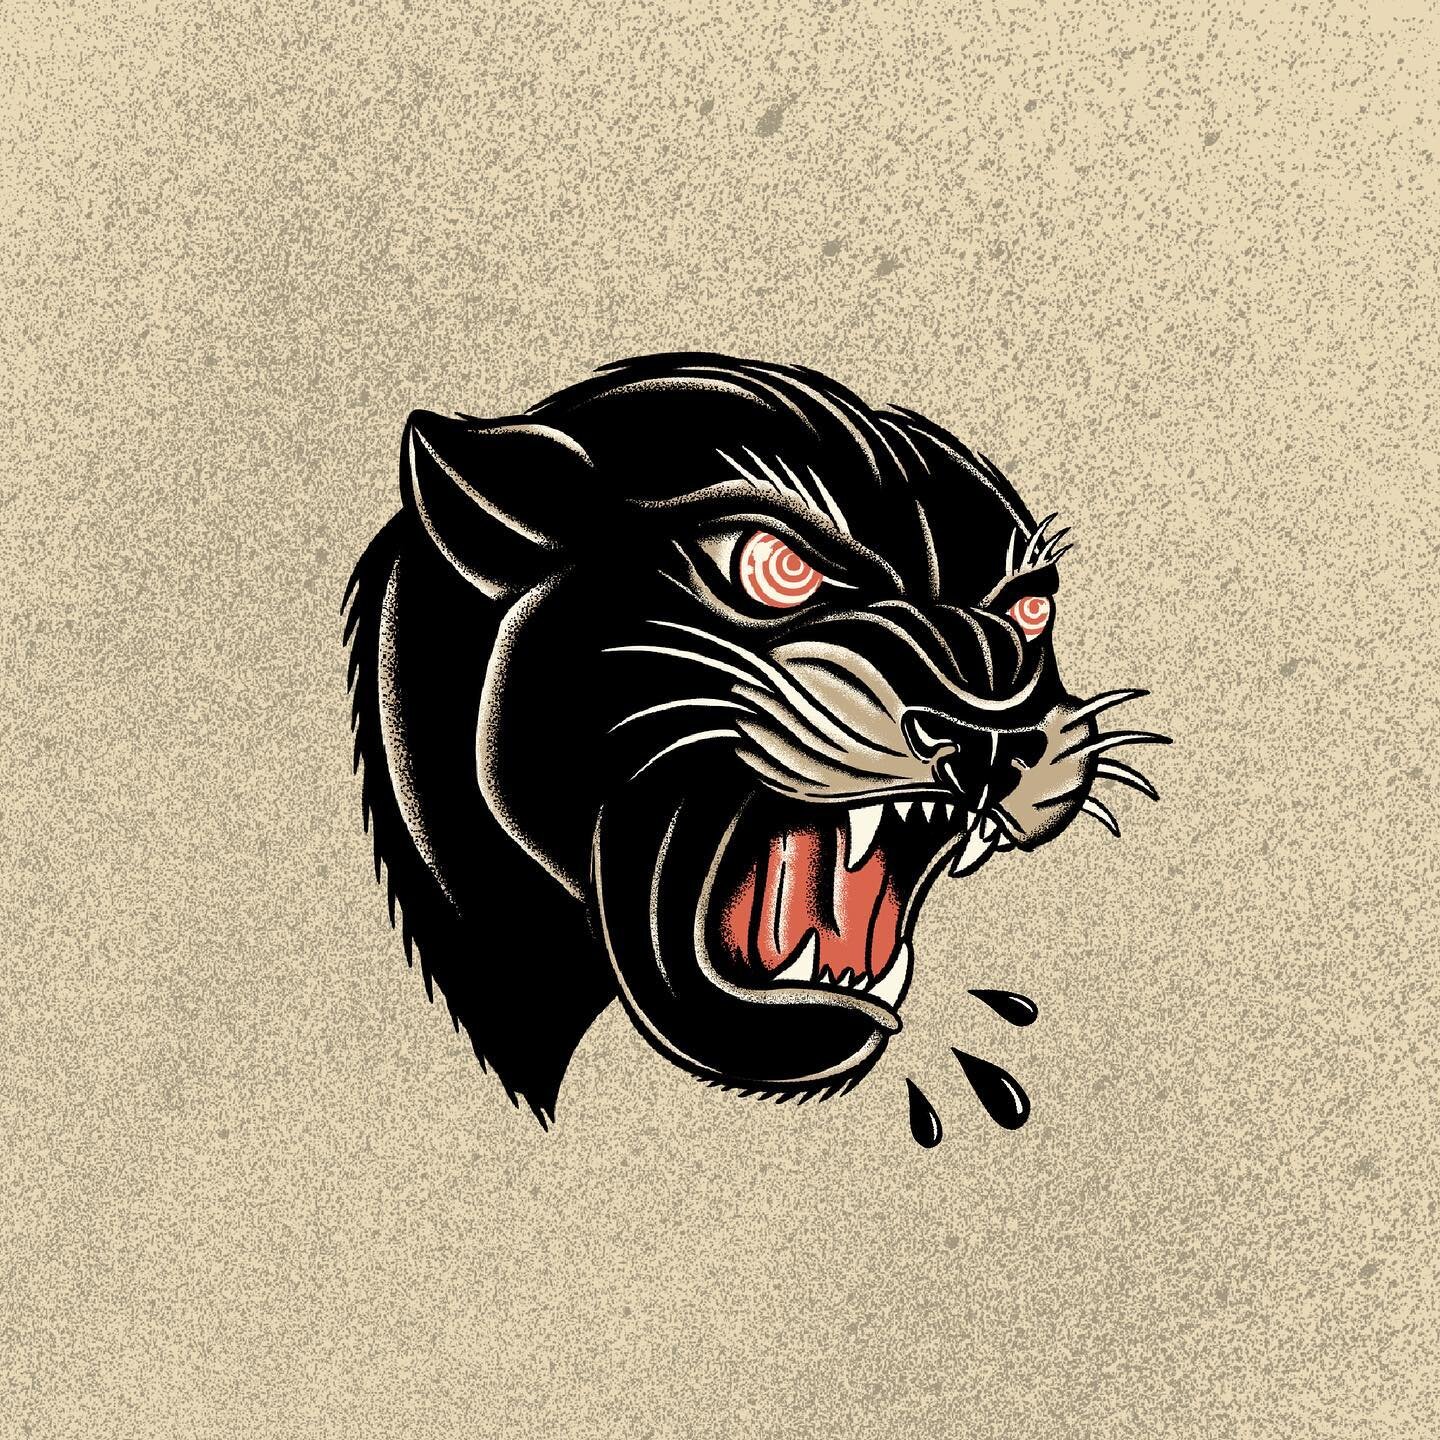 Panther head - 🐈&zwj;⬛ 🌀 
.
.
.
.
 #traditionalflash #traditionaldrawing #boulder #outsideunknown #outeracre #designbadass  #distressedunrest #neotraditionaltattoo #panther #panthertattoo #blackpanther  #graphicgang  #designsheriff #trugrittexrures